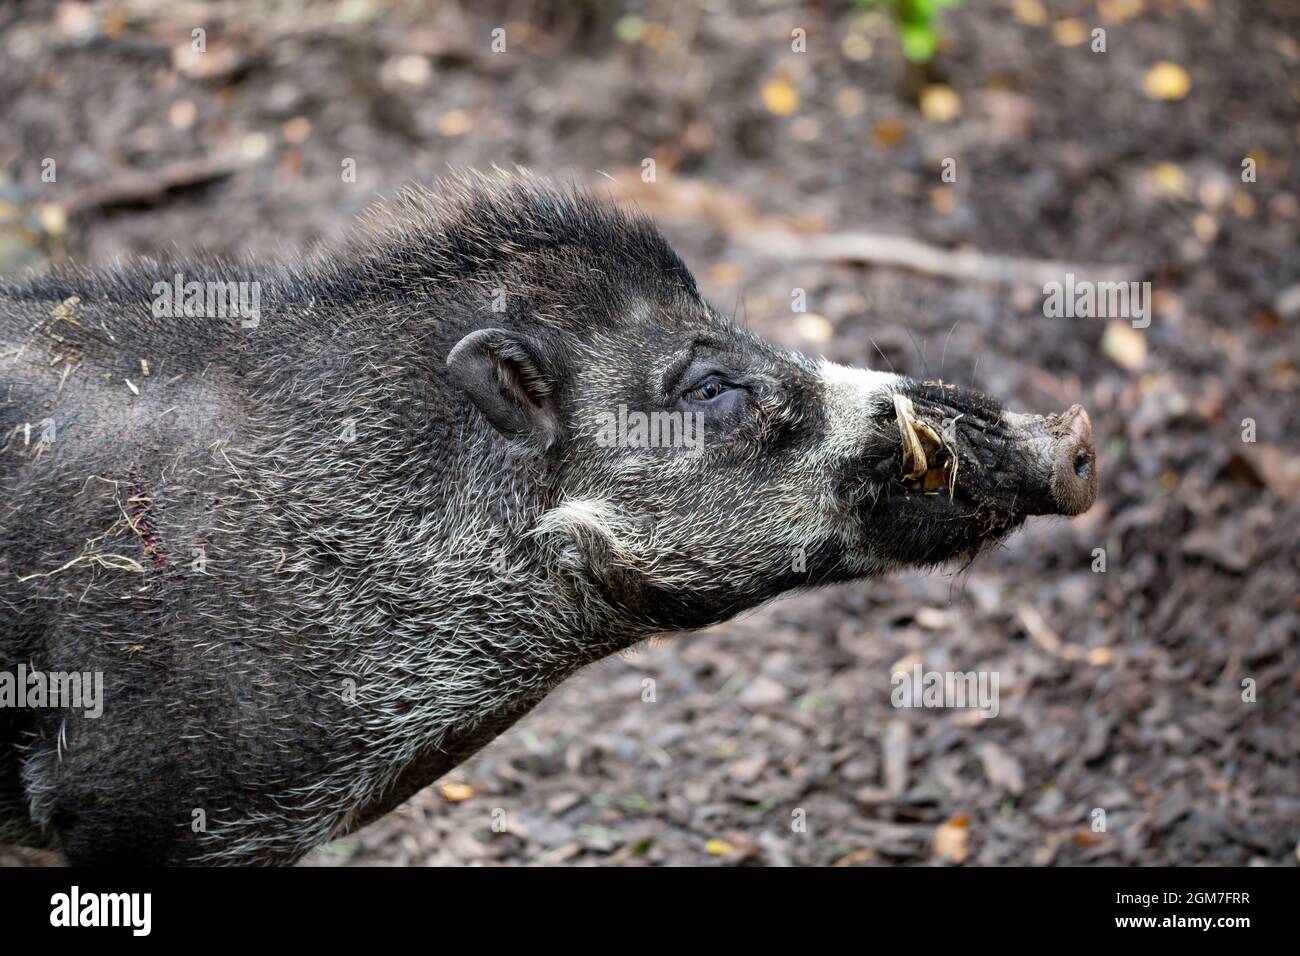 Big adult boar of Visayan warty pig (Sus cebifrons) is a critically endangered species in the pig genus. It is endemic to Visayan Islands in the centr Stock Photo